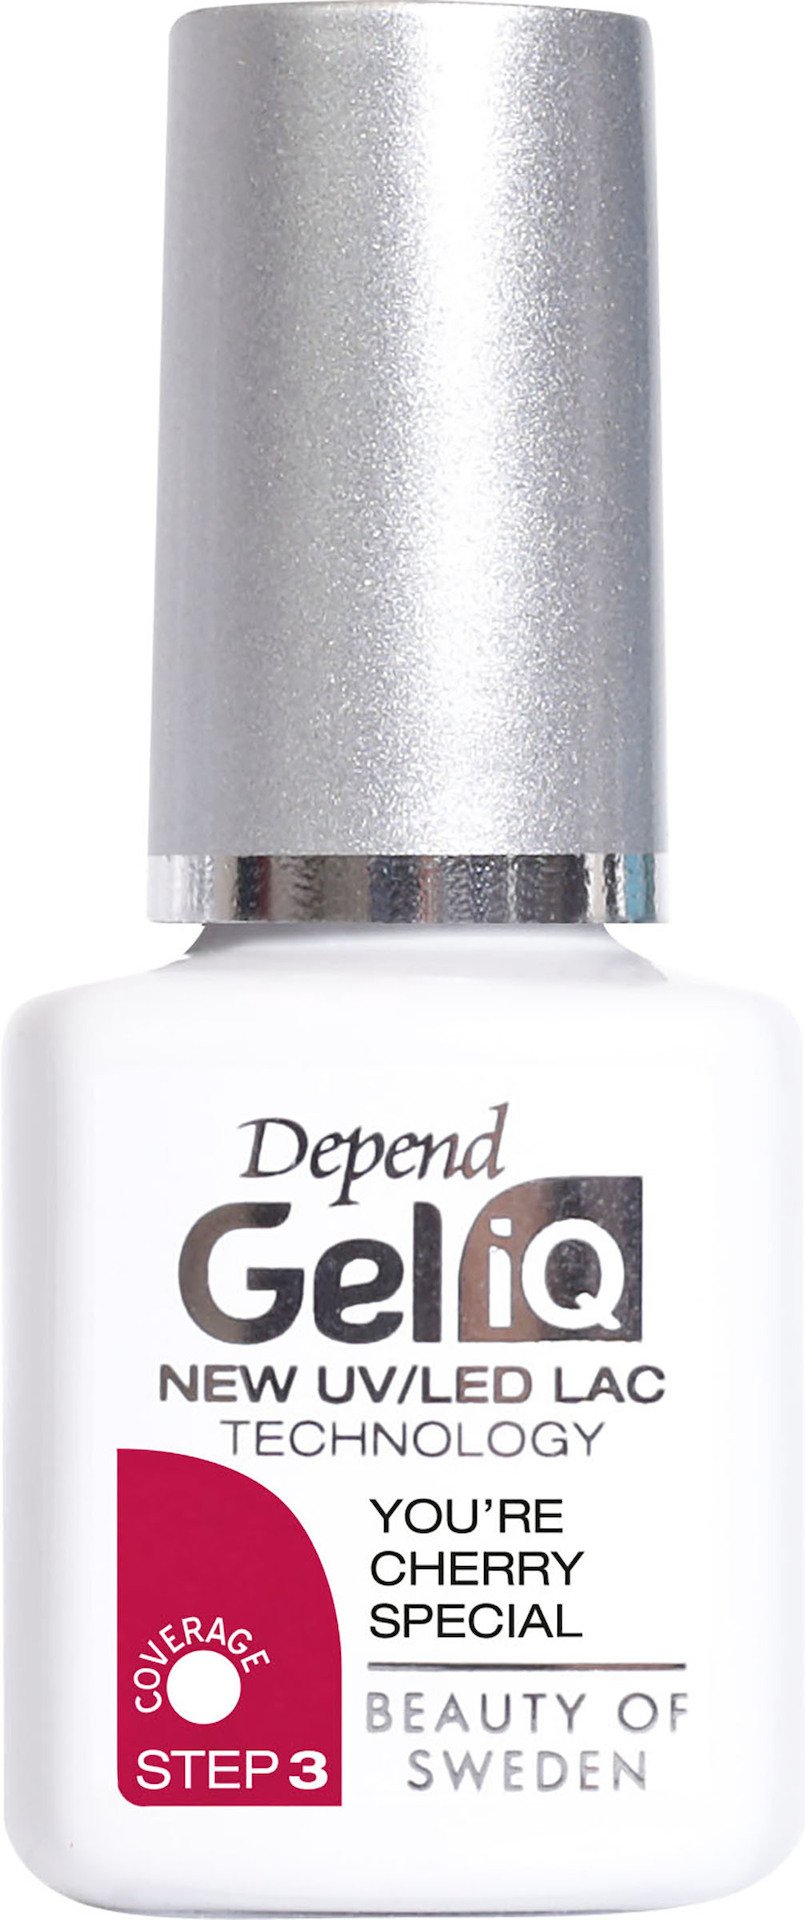 Depend Gel iQ You're Cherry Special Red 5 ml